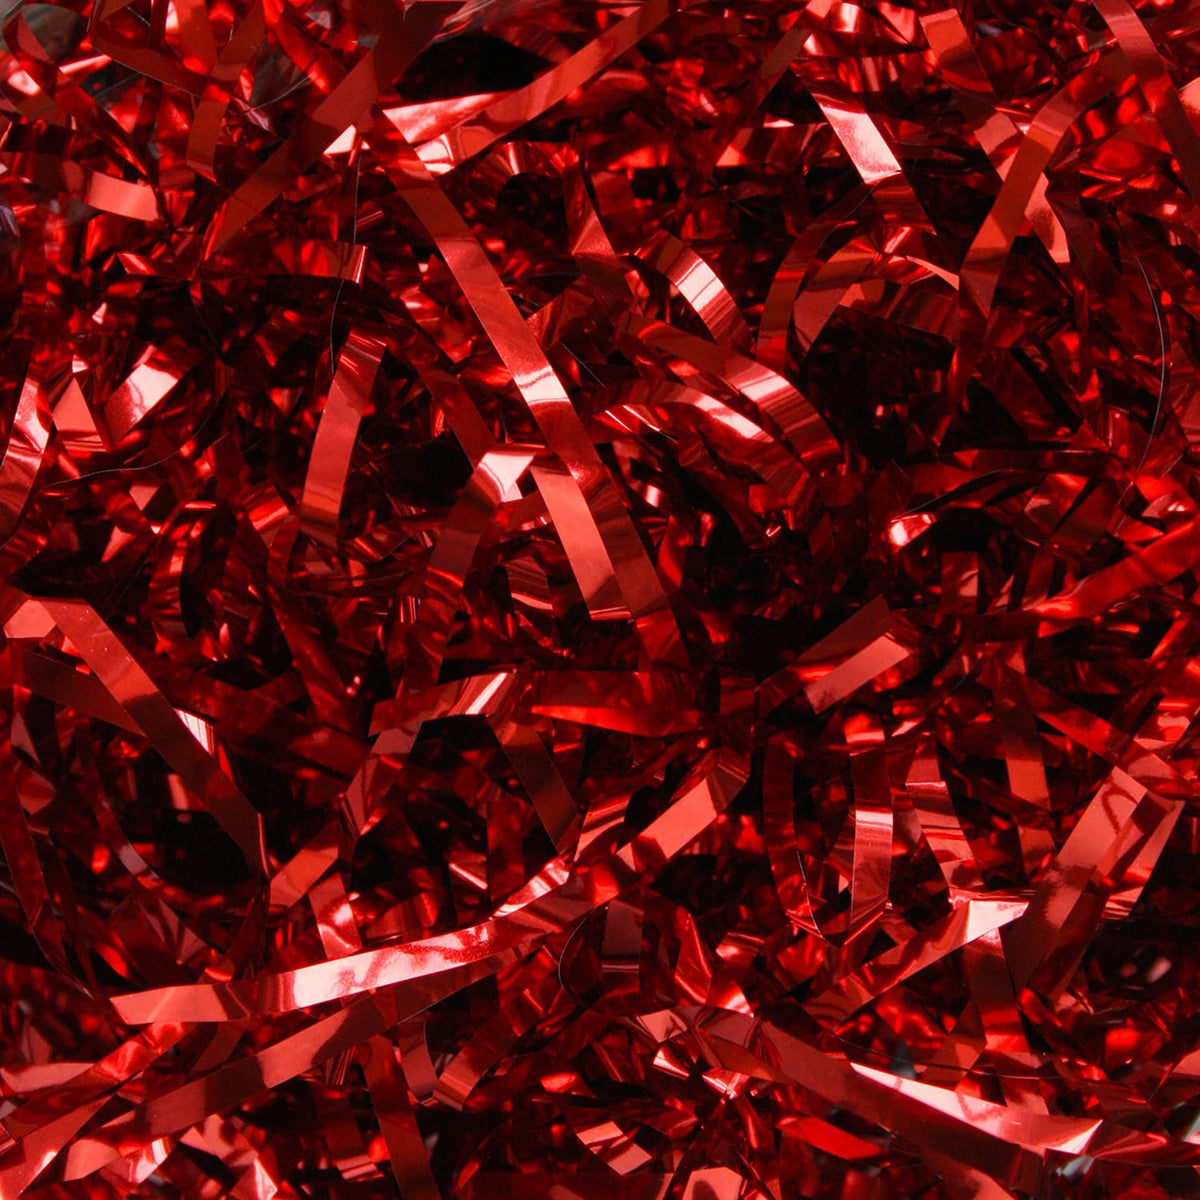 Metallic Shredded Tissue Paper for Packaging and Decor - Red